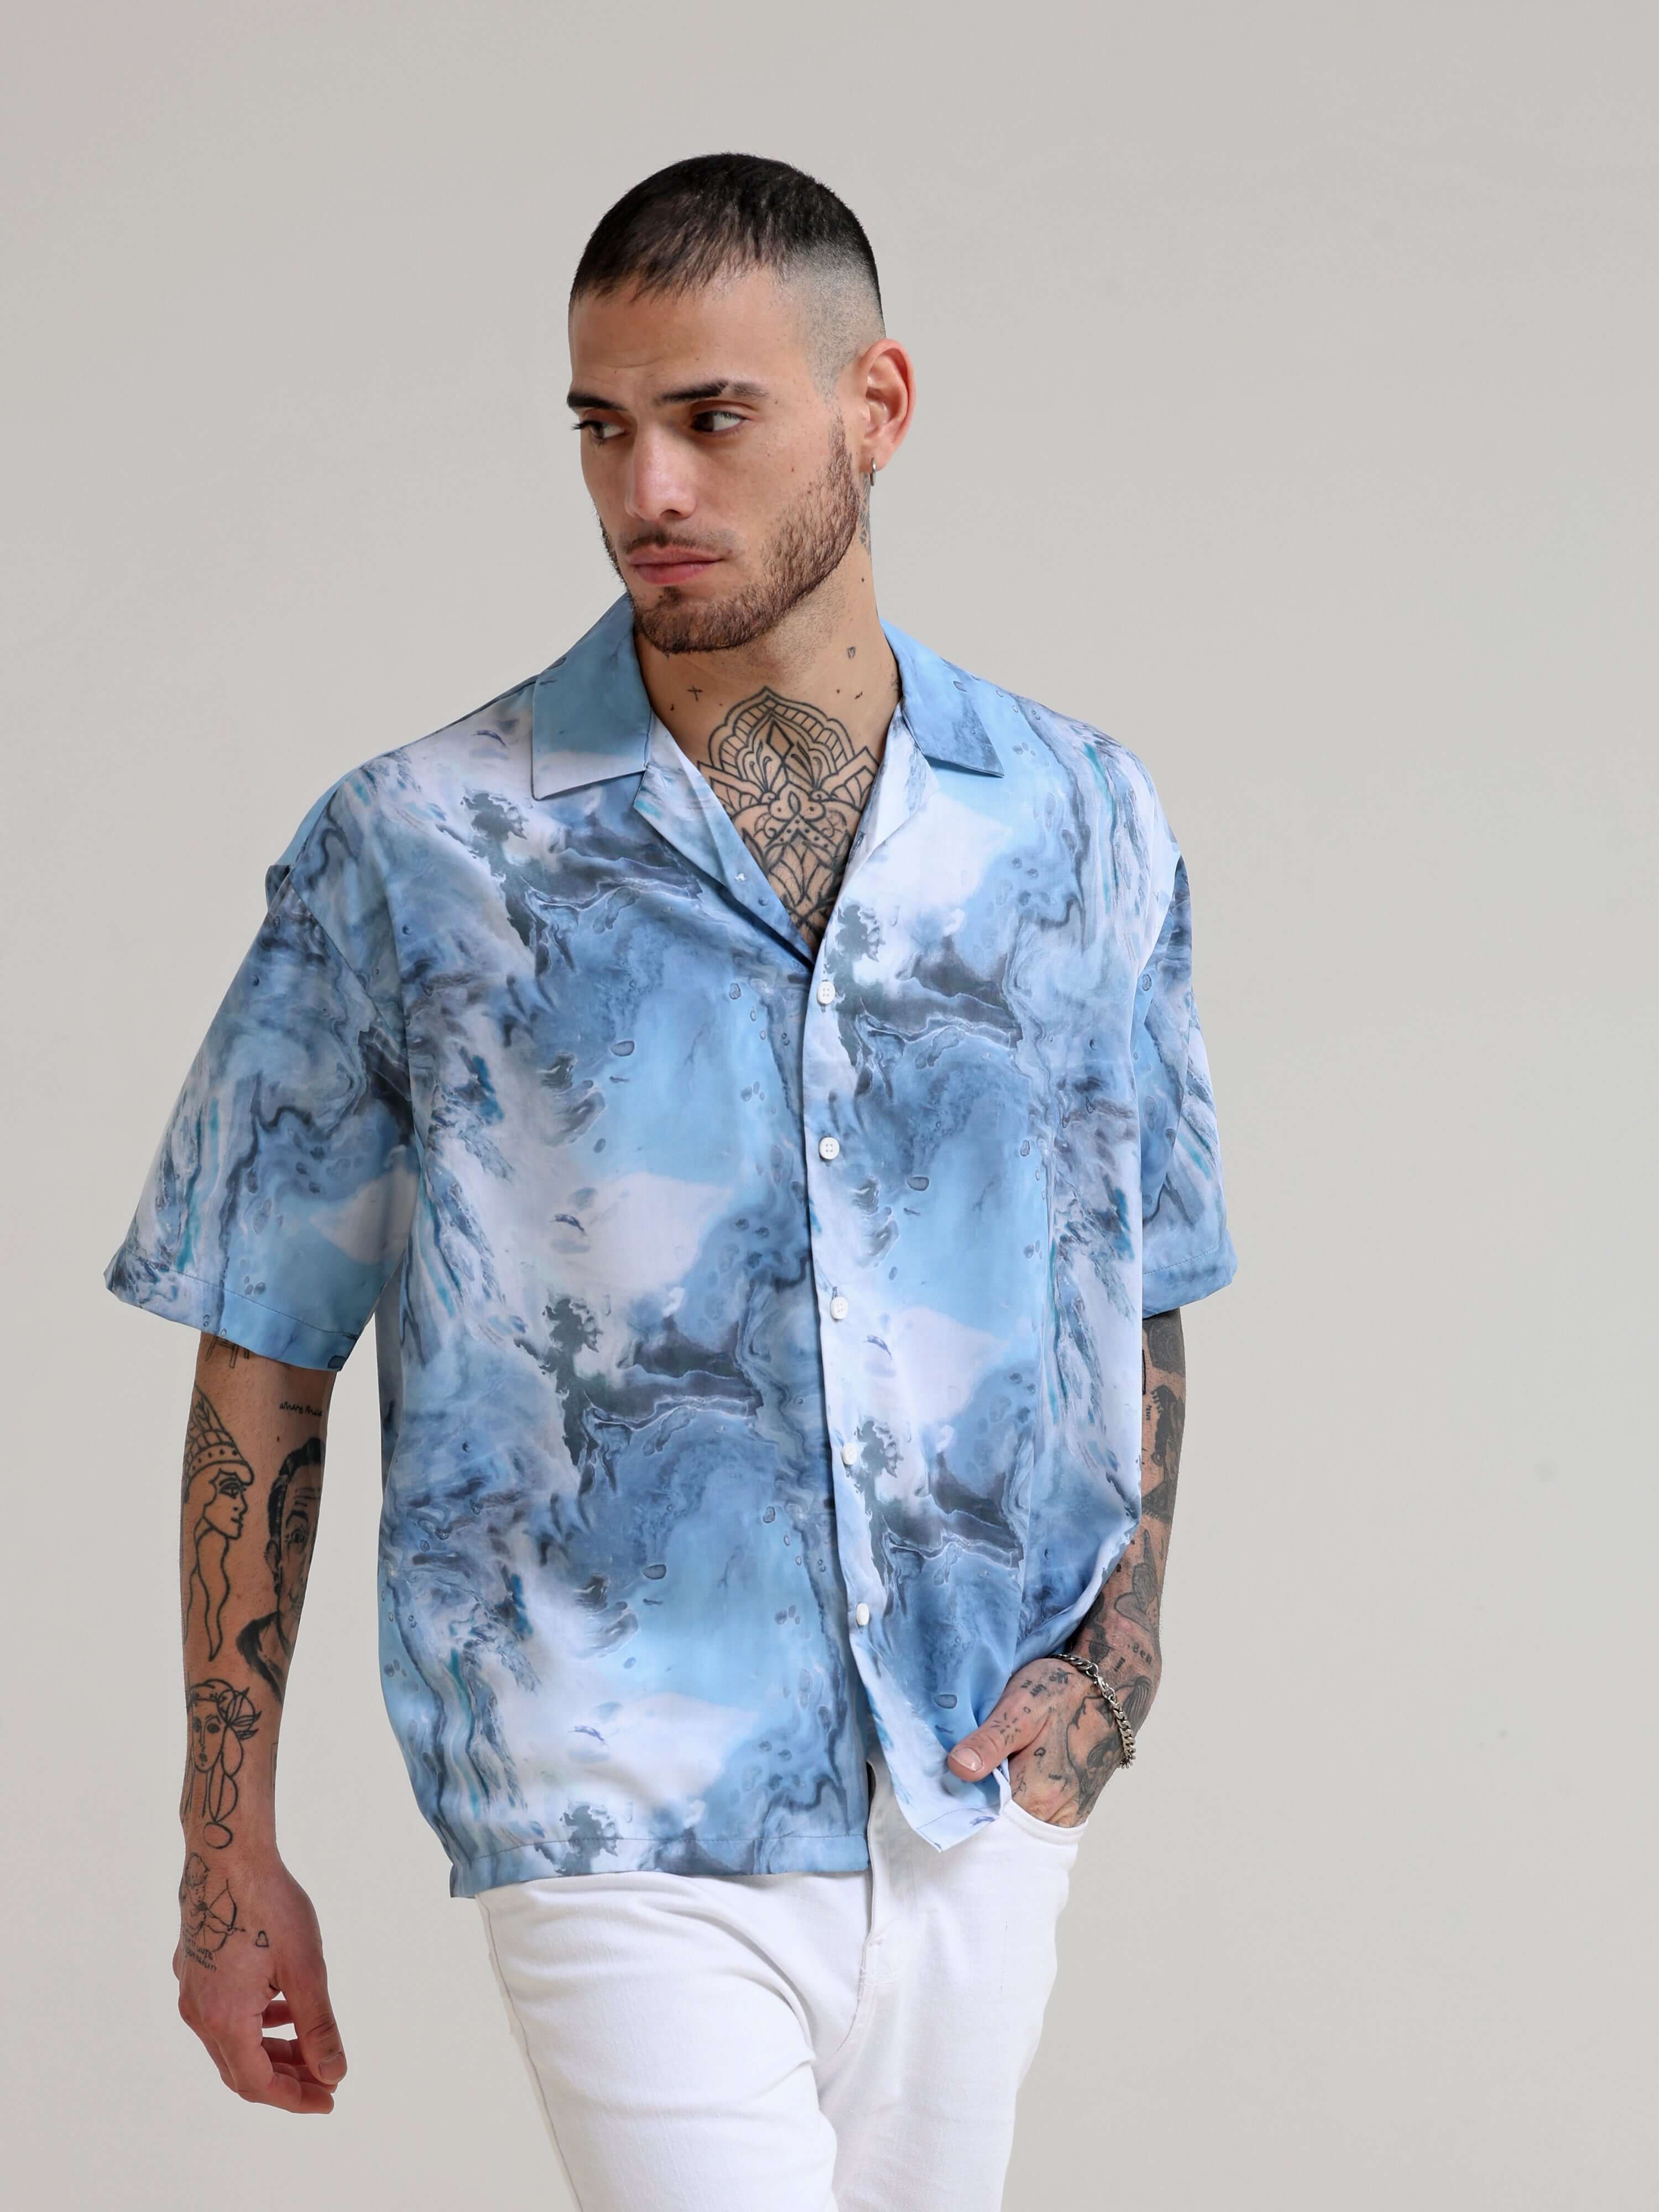 Blue Camp Oversized Shirt shop online at Estilocus. Our Blue Camp Oversized Shirt is perfect for those Hawaiian days. The relaxed fit and lightweight fabric make it comfortable to wear all day. Its classic style is perfect for those summer streetwear look